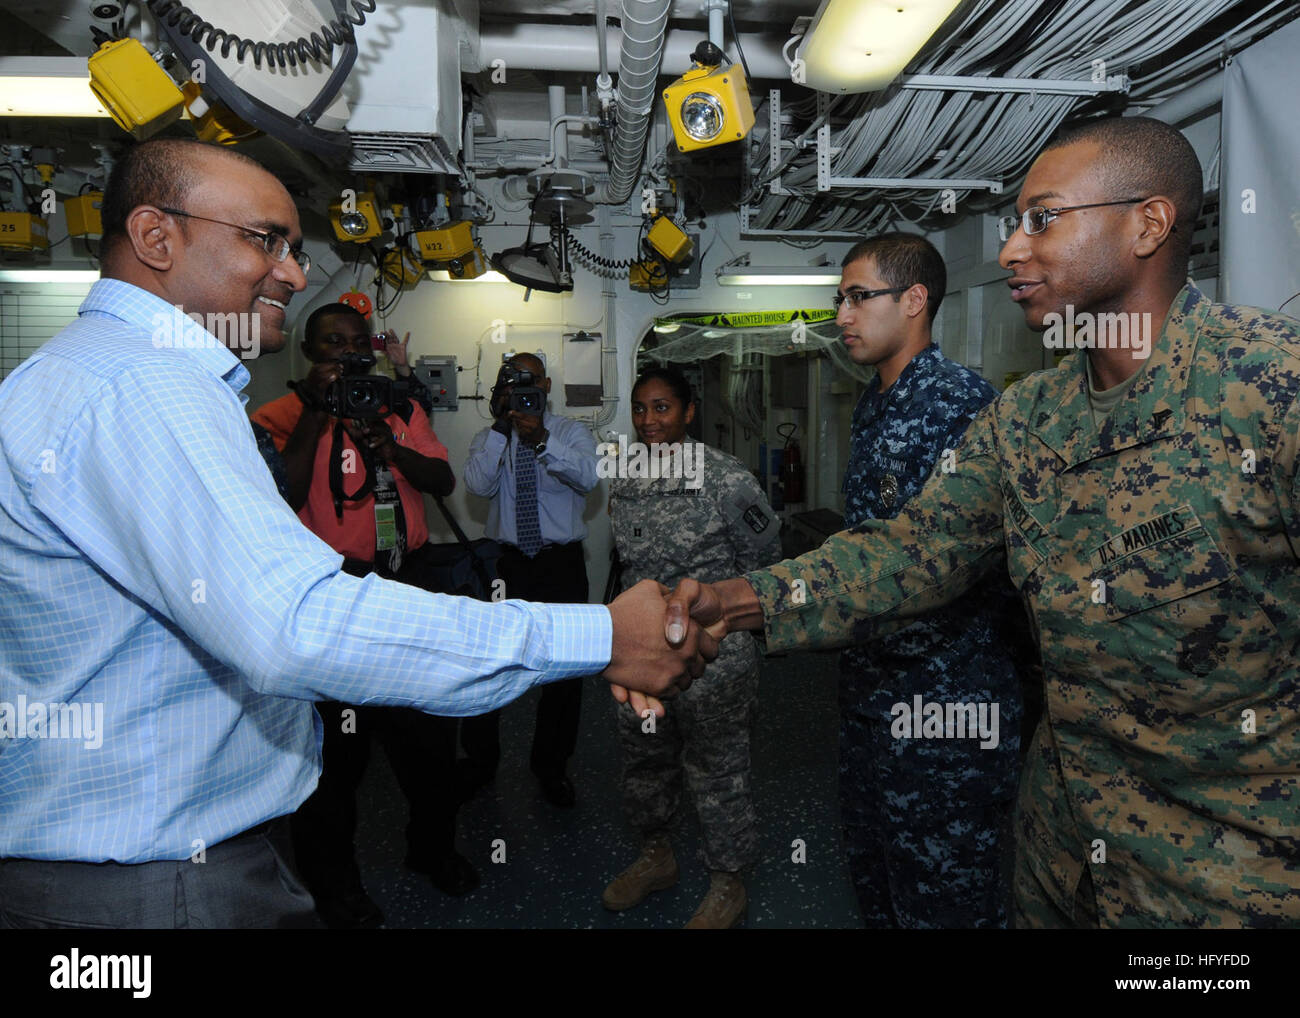 101025-N-7680E-073 CARIBBEAN SEA (Oct. 25, 2010) President of Guyana Bharat Jagdeo meets Cpl. John Eversley, a Guyanese-American Marine embarked aboard the multi-purpose amphibious assault ship USS Iwo Jima (LHD 7). Iwo Jima is anchored off of the coast of Guyana supporting the Continuing Promise 2010 humanitarian civic assistance mission. The assigned medical and engineering staff embarked aboard Iwo Jima is working with partner nations to provide medical, dental, veterinary, and engineering assistance in eight countries. (U.S. Navy photo by Mass Communication Specialist 2nd Class Zane Ecklun Stock Photo